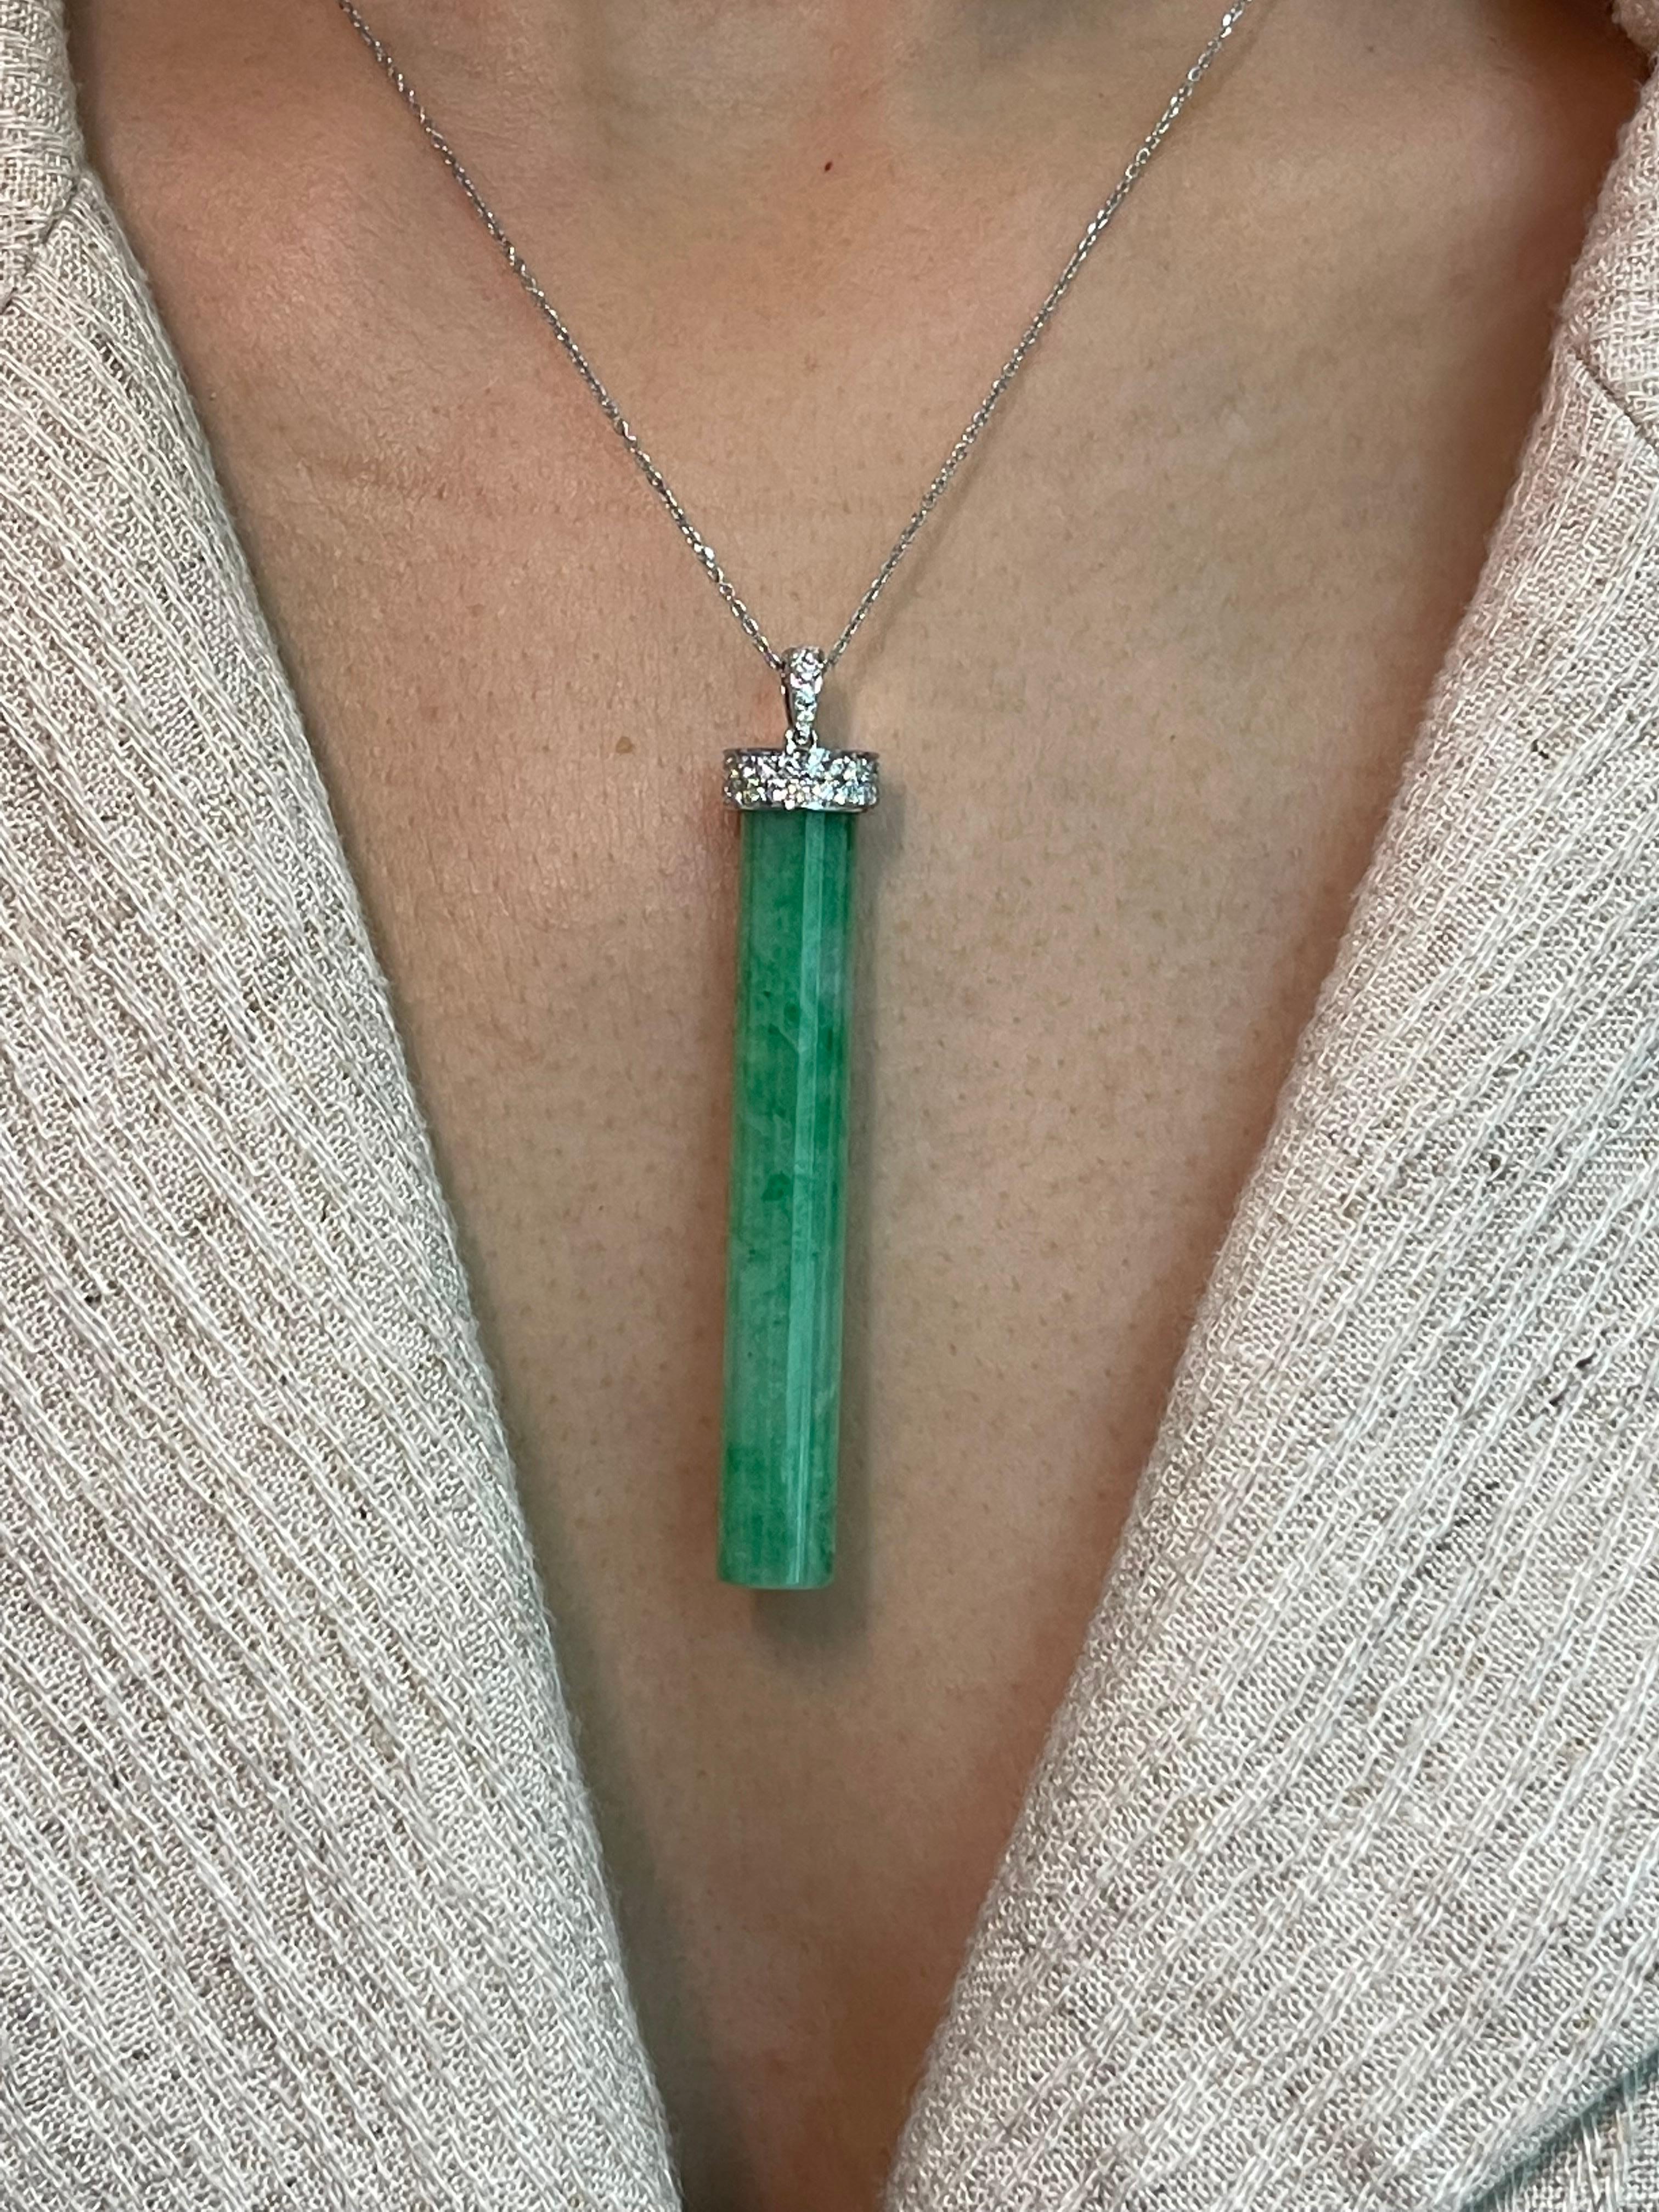 Please check out the HD video! This is certified to be natural jadeite jade. The pendant is set in 18k white gold and diamonds. There are a total of 0.42 cts of diamonds in this setting. In jadeite jade 2 main features determines the price 1) the